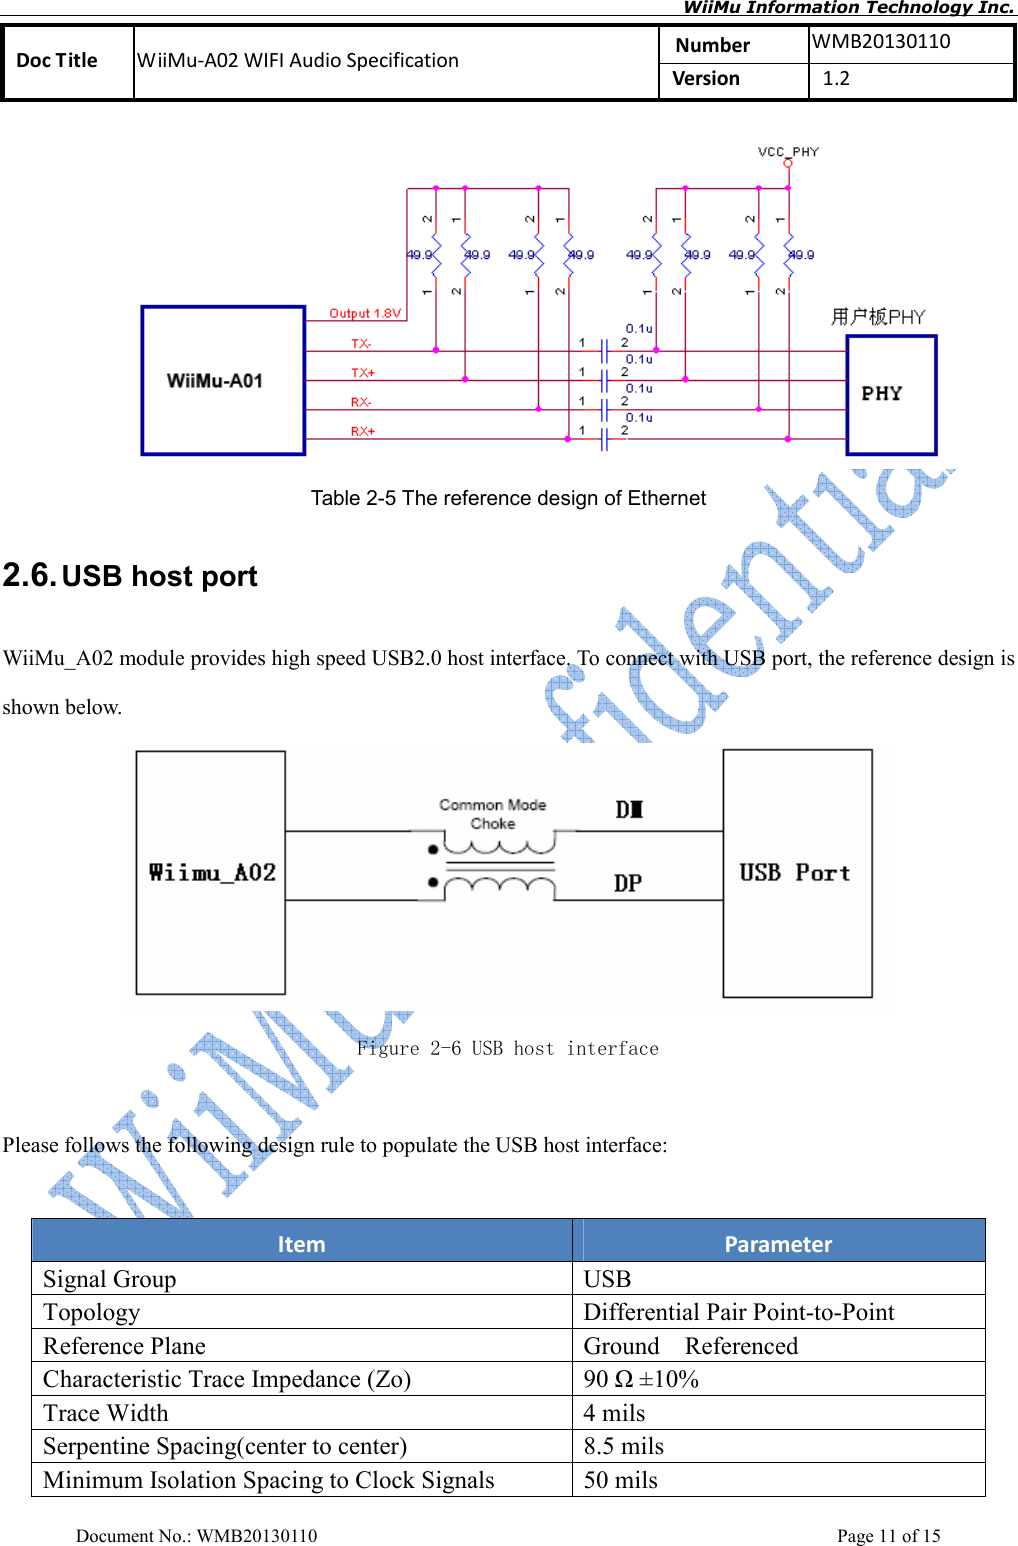       WiiMu Information Technology Inc. Number  WMB20130110 Doc Title  WiiMu-A02 WIFI Audio Specification  Version    1.2  Document No.: WMB20130110    Page 11 of 15  Table 2-5 The reference design of Ethernet 2.6. USB host port   WiiMu_A02 module provides high speed USB2.0 host interface. To connect with USB port, the reference design is shown below.      Figure 2-6 USB host interface  Please follows the following design rule to populate the USB host interface:    Item  Parameter Signal Group USB Topology  Differential Pair Point-to-Point Reference Plane  Ground    Referenced Characteristic Trace Impedance (Zo)  90 Ω ±10% Trace Width  4 mils Serpentine Spacing(center to center)  8.5 mils Minimum Isolation Spacing to Clock Signals  50 mils 